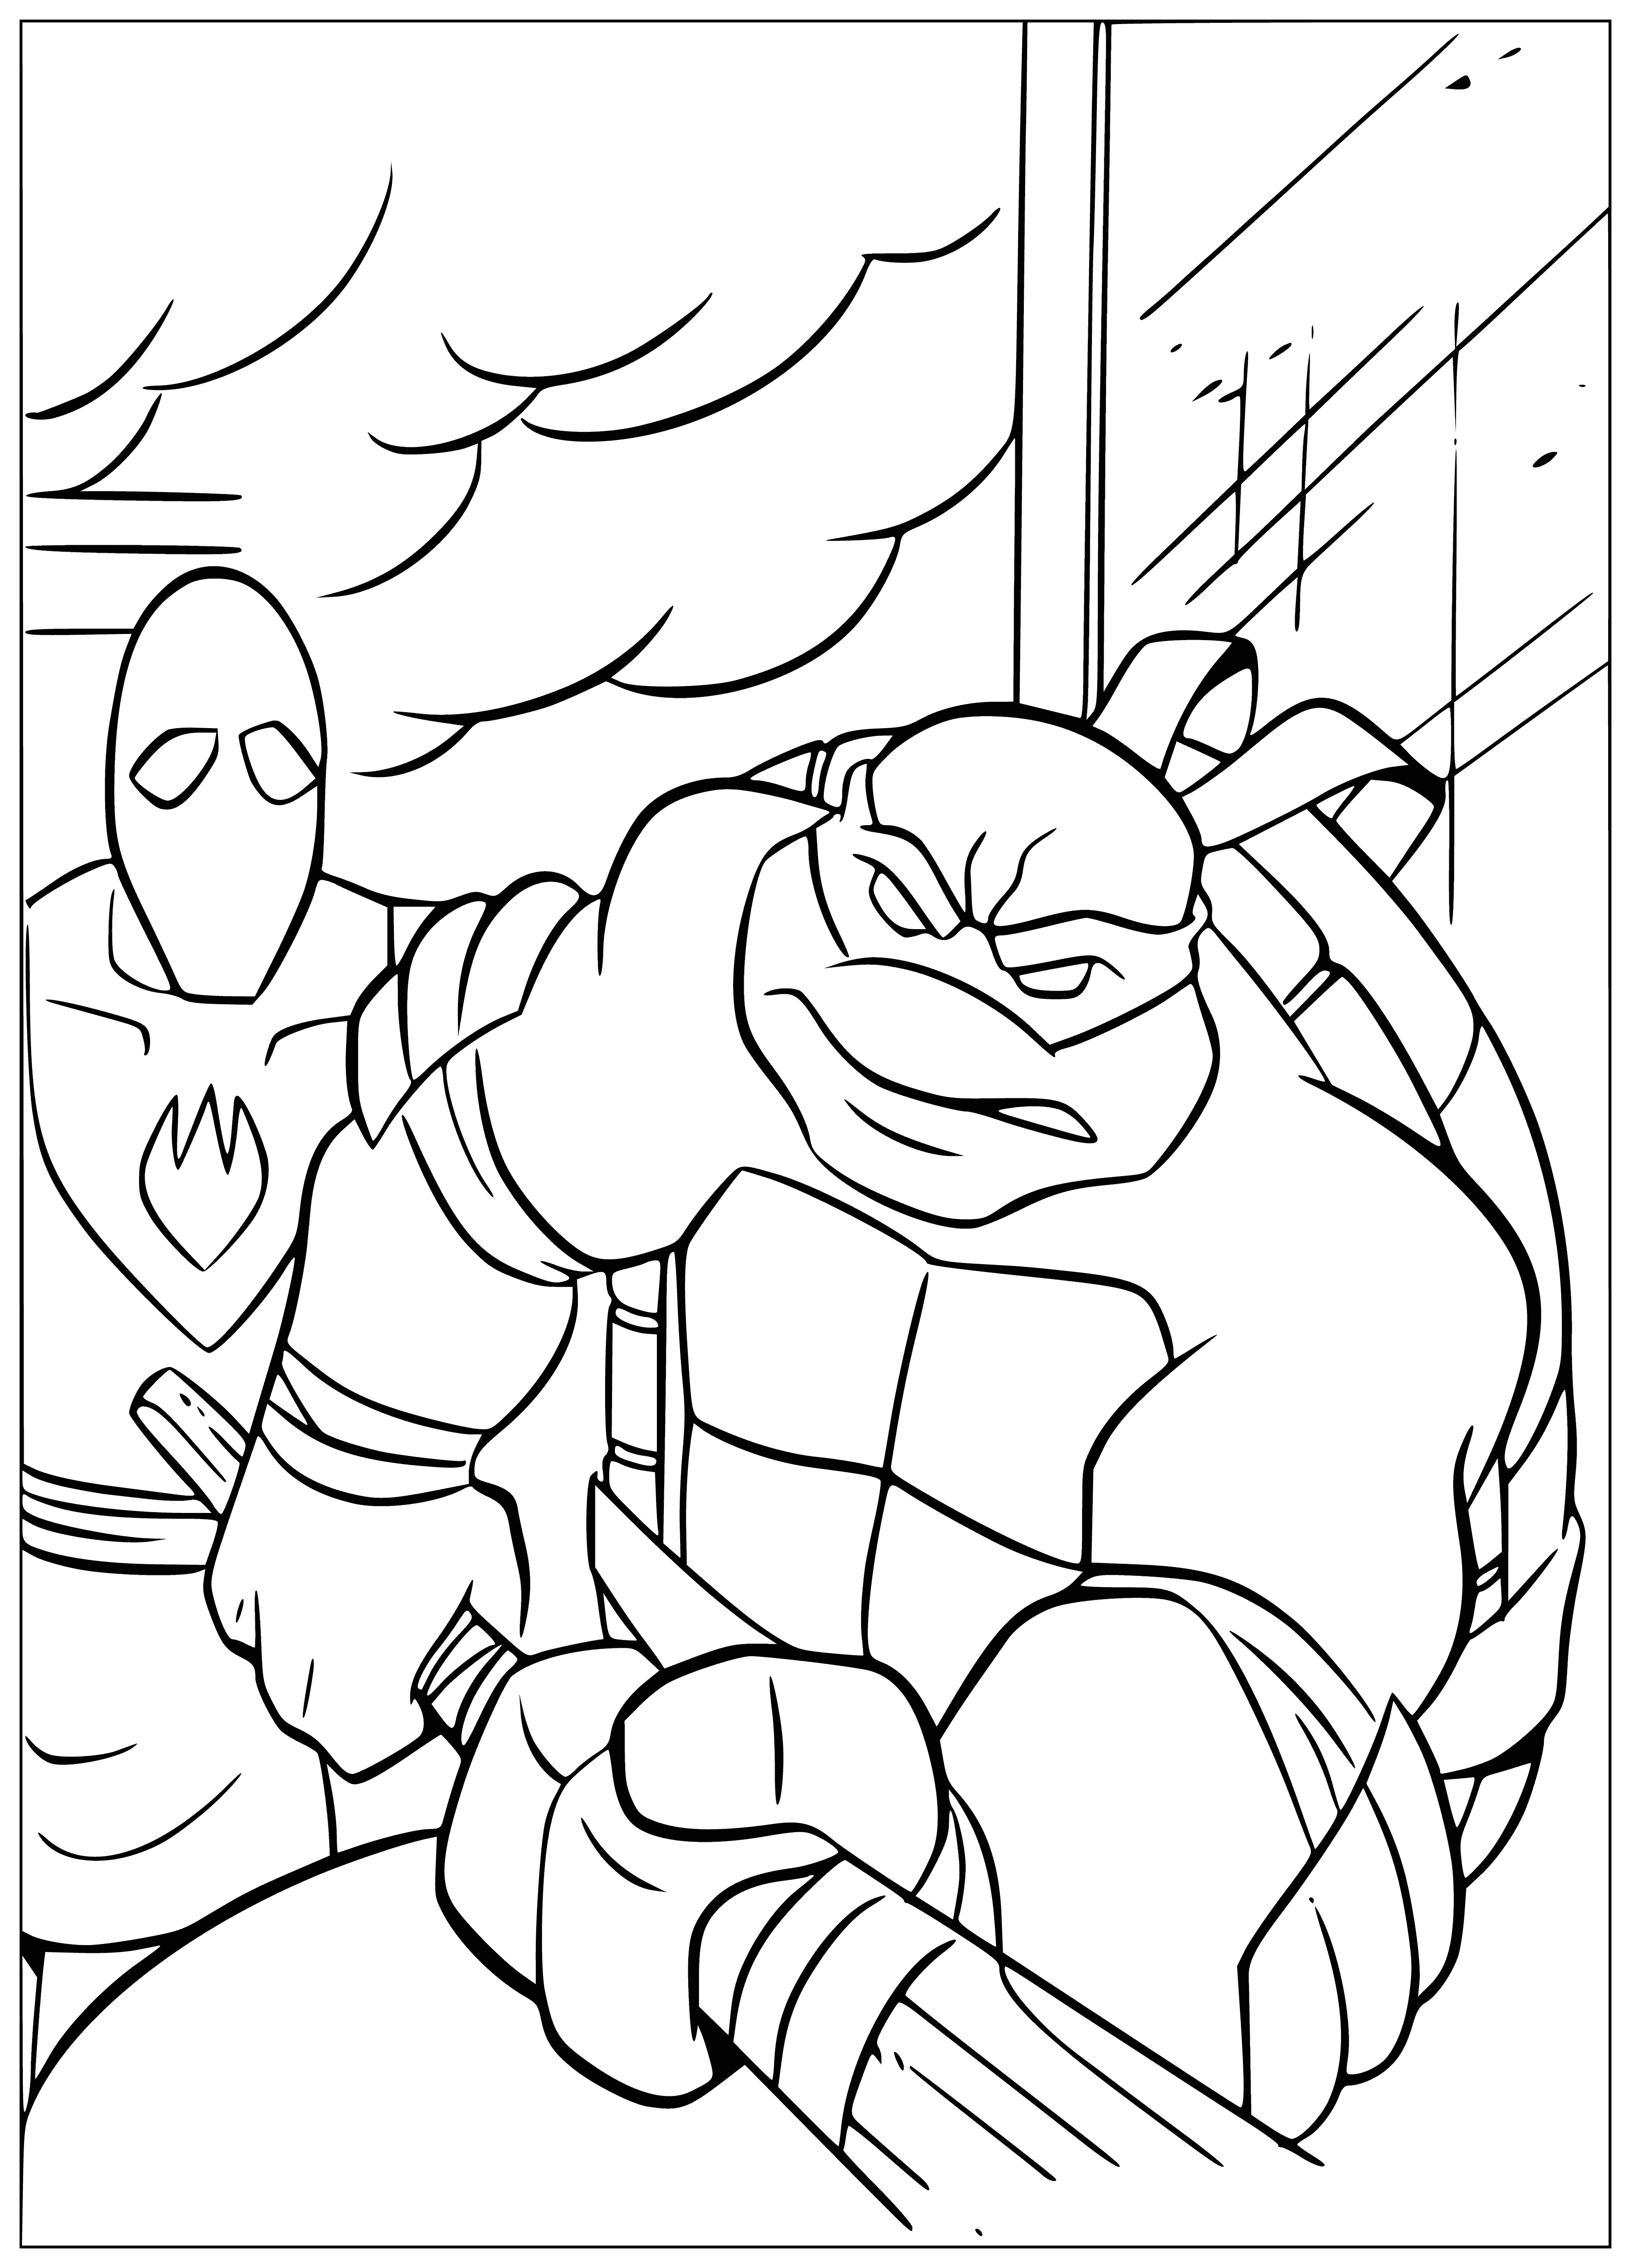 coloring page: Dark-haired turtle teen in purple mask, Donatello & cityscape at night in background. Written above his head: Donatello.